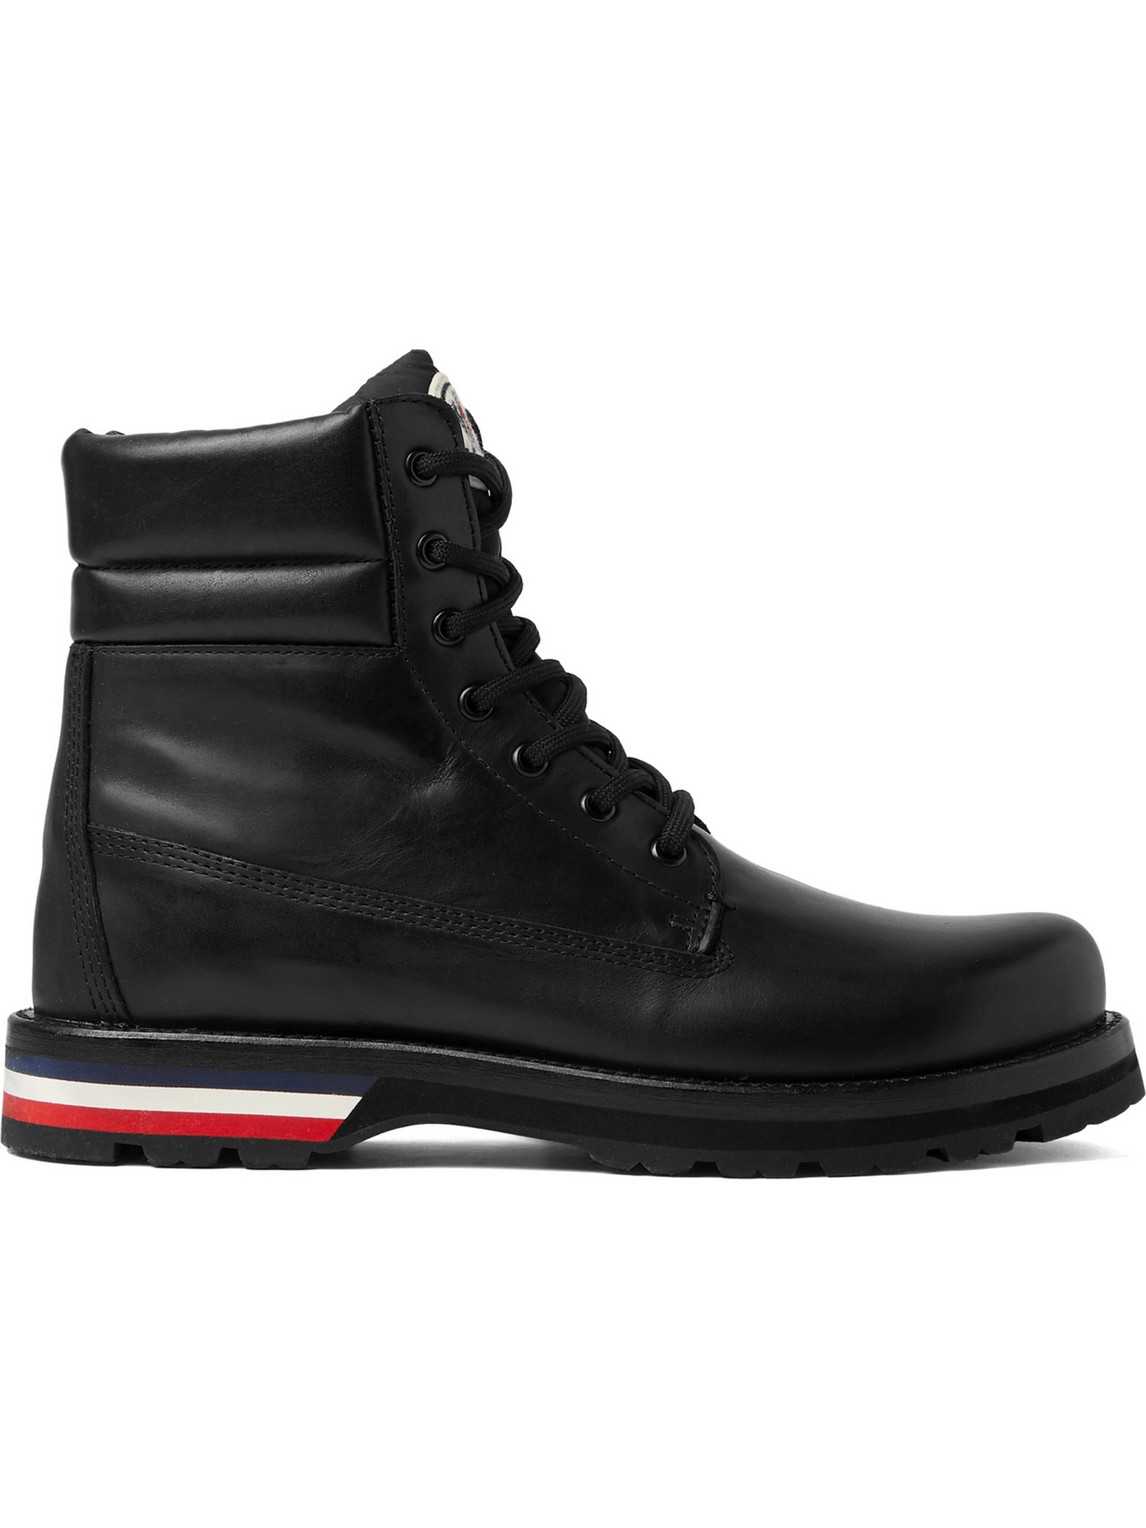 Moncler Vancouver Striped Leather Hiking Boots